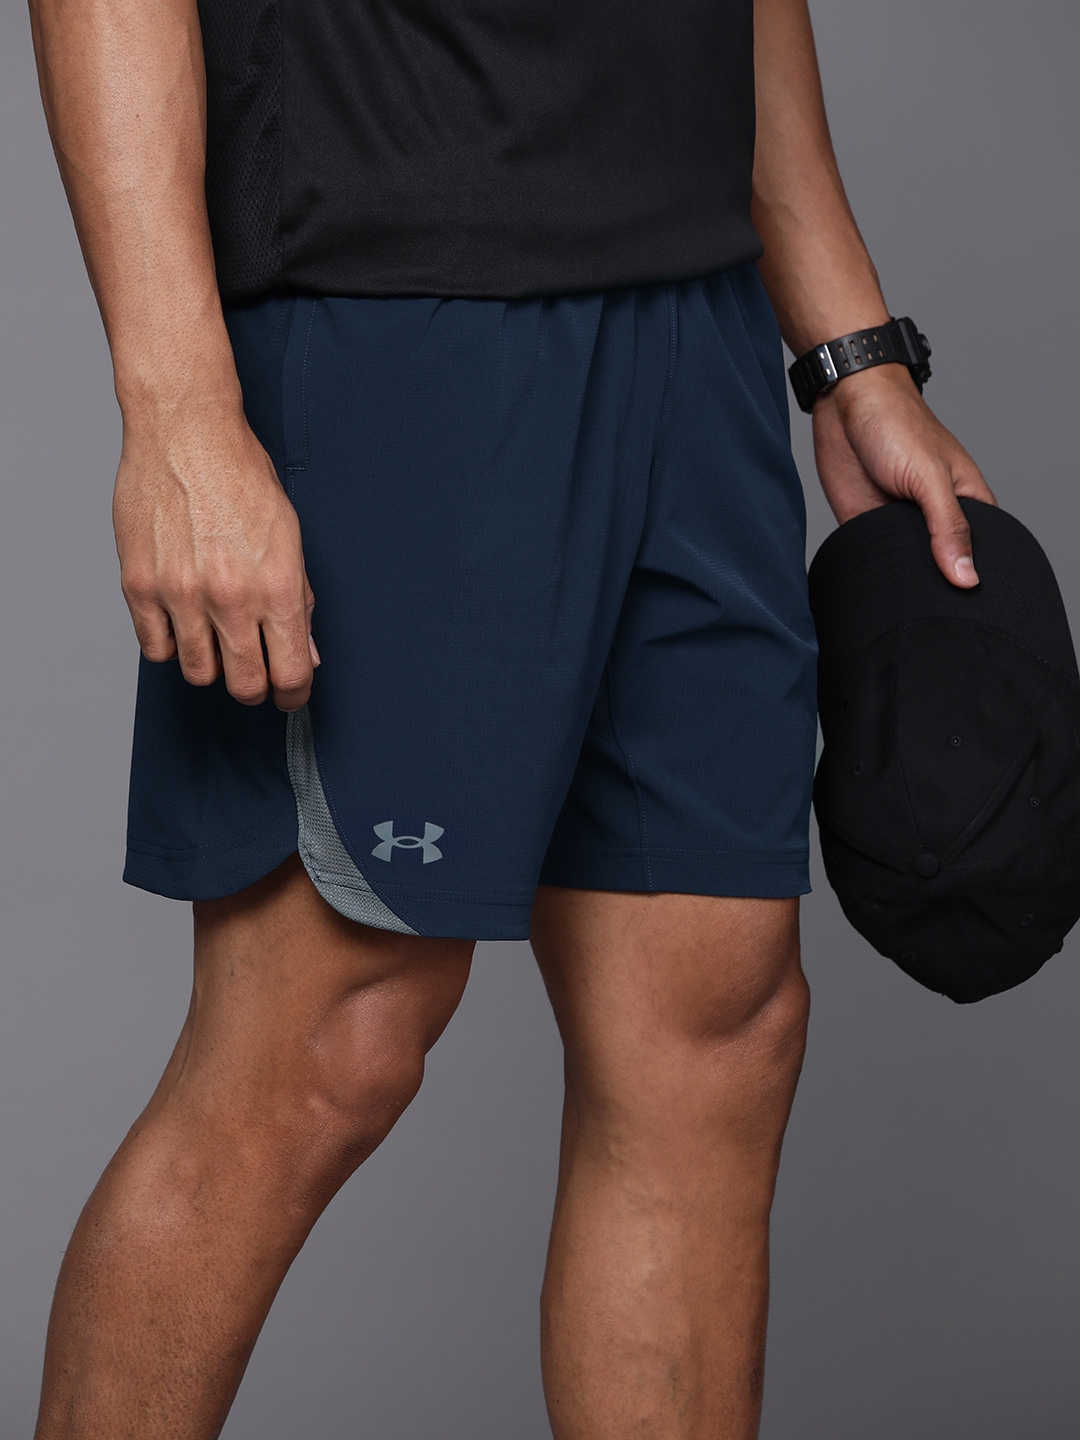 Under Armour Men's UA Elevated Woven 2.0 Shorts